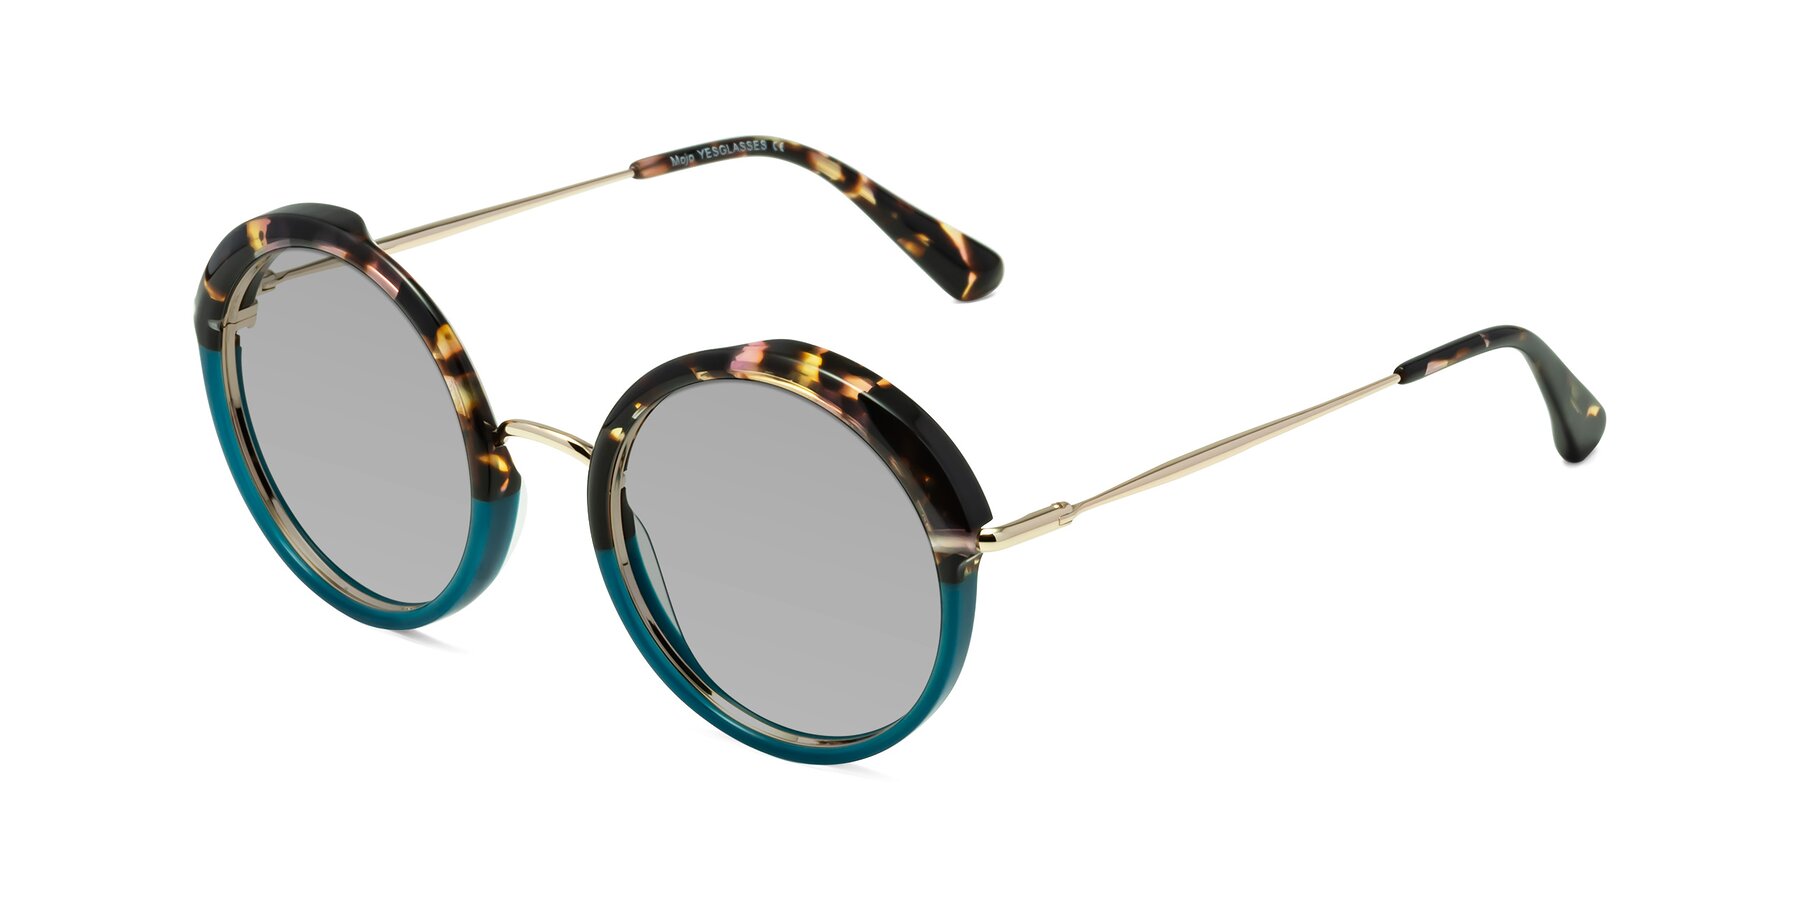 Angle of Mojo in Floral-Teal with Light Gray Tinted Lenses